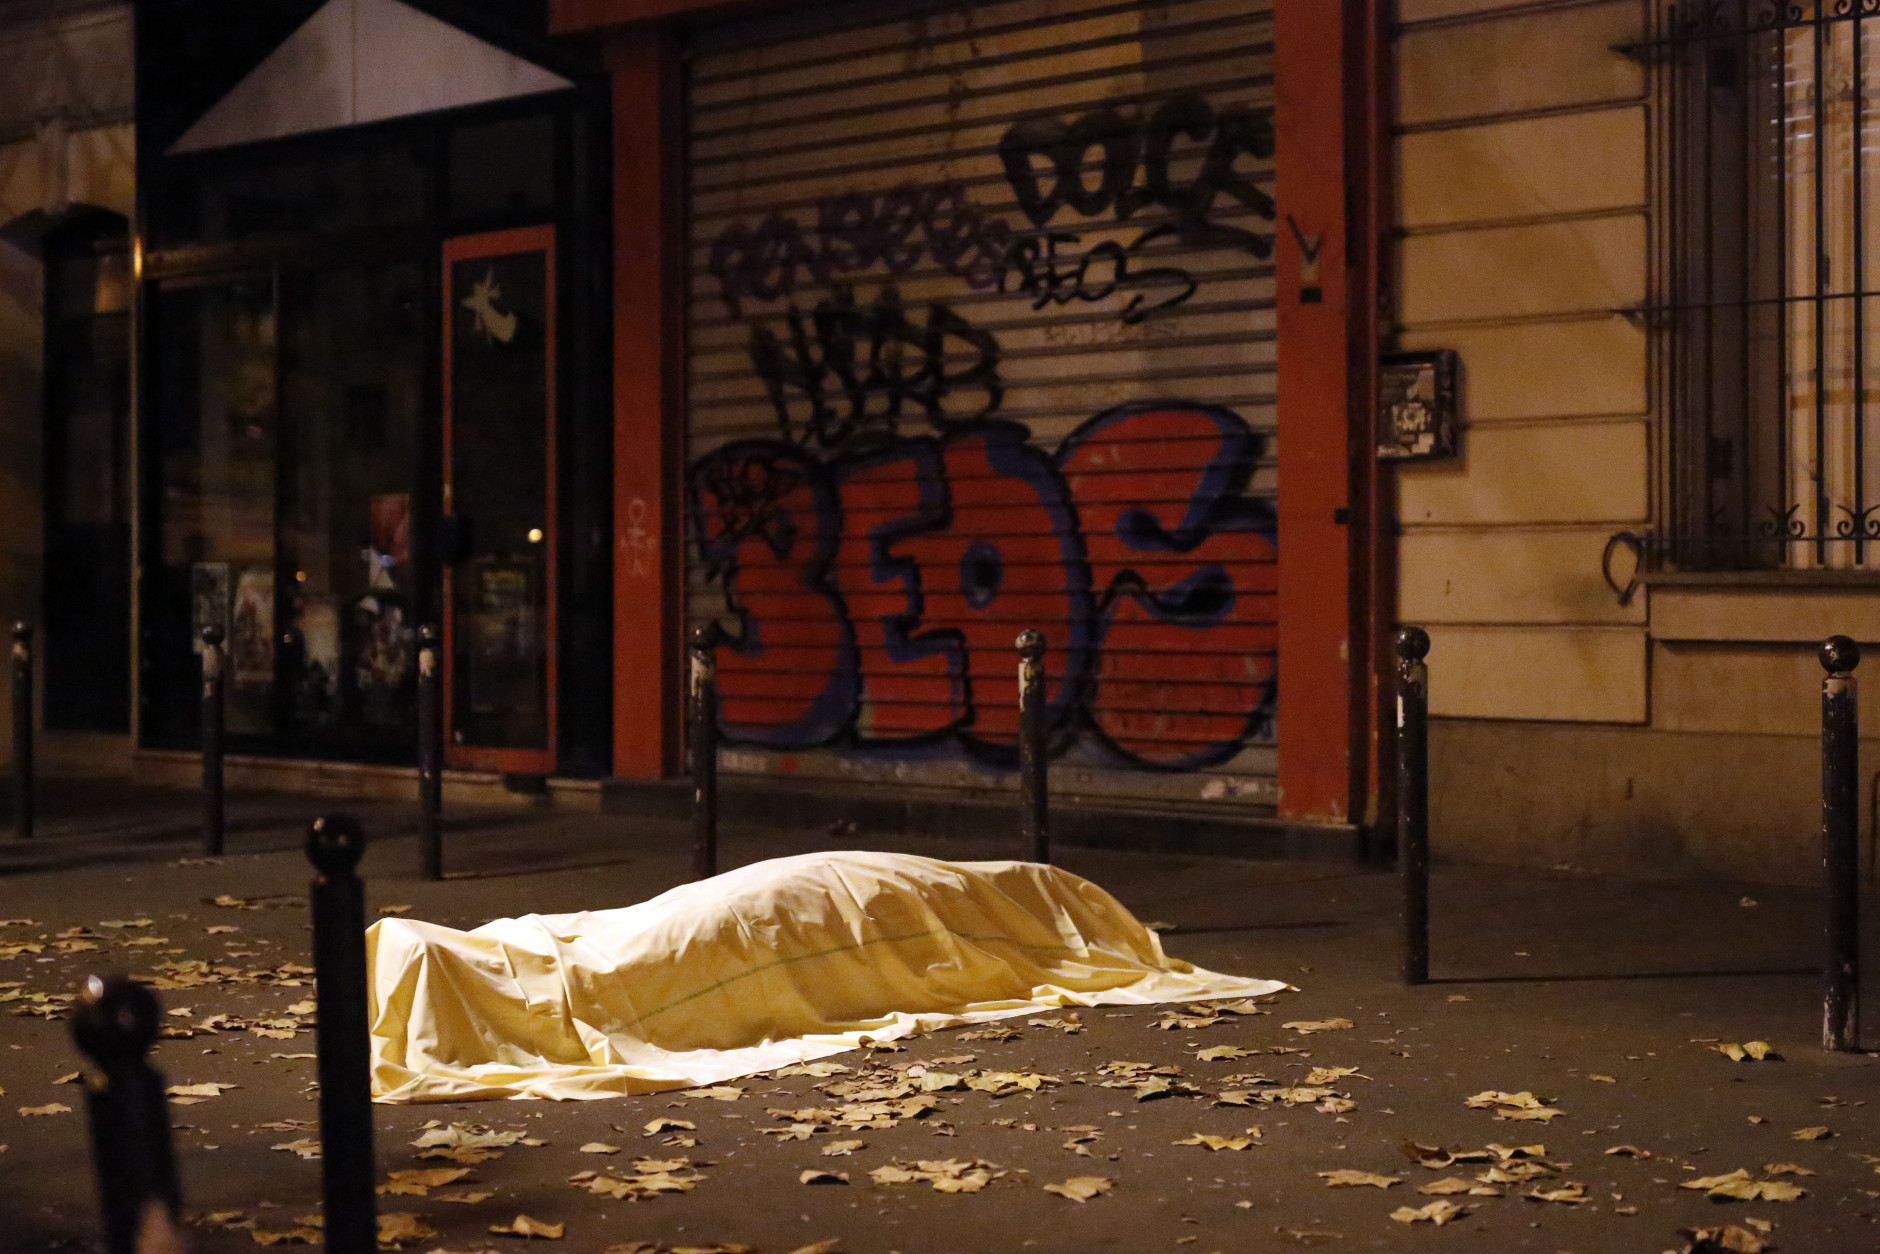 A victim under a blanket lays dead outside the Bataclan theater in Paris, Friday Nov. 13, 2015. Well over 100 people were killed  in a series of shooting and explosions. French President Francois Hollande declared a state of emergency and announced that he was closing the country's borders. (AP Photo/Jerome Delay)